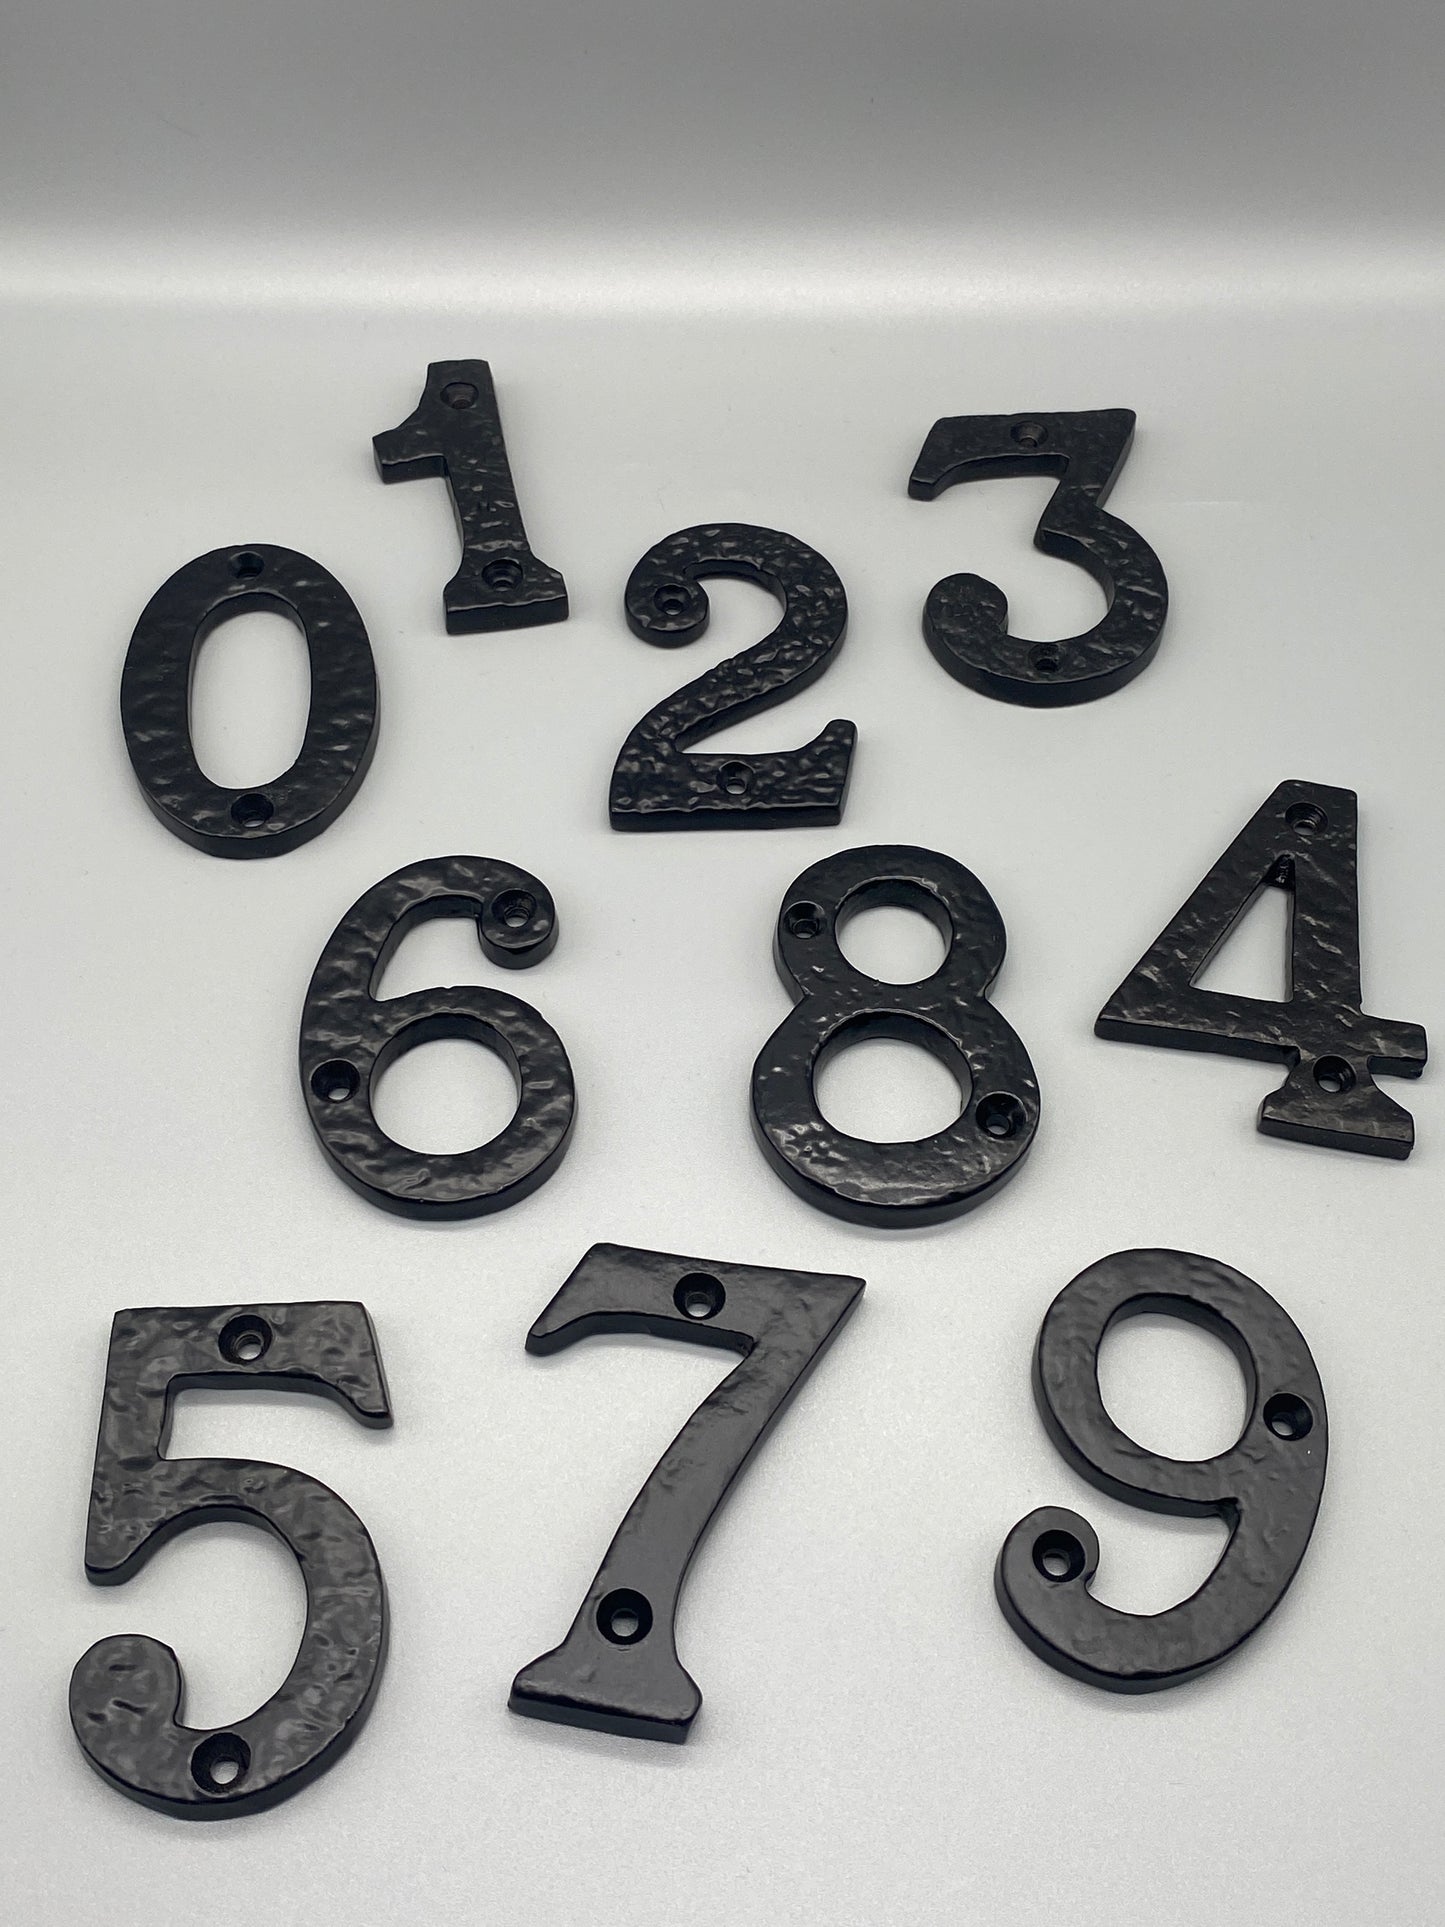 Forged Black Numerals - Solid Door Numbers - 75mm (4" inch) - Black Finish